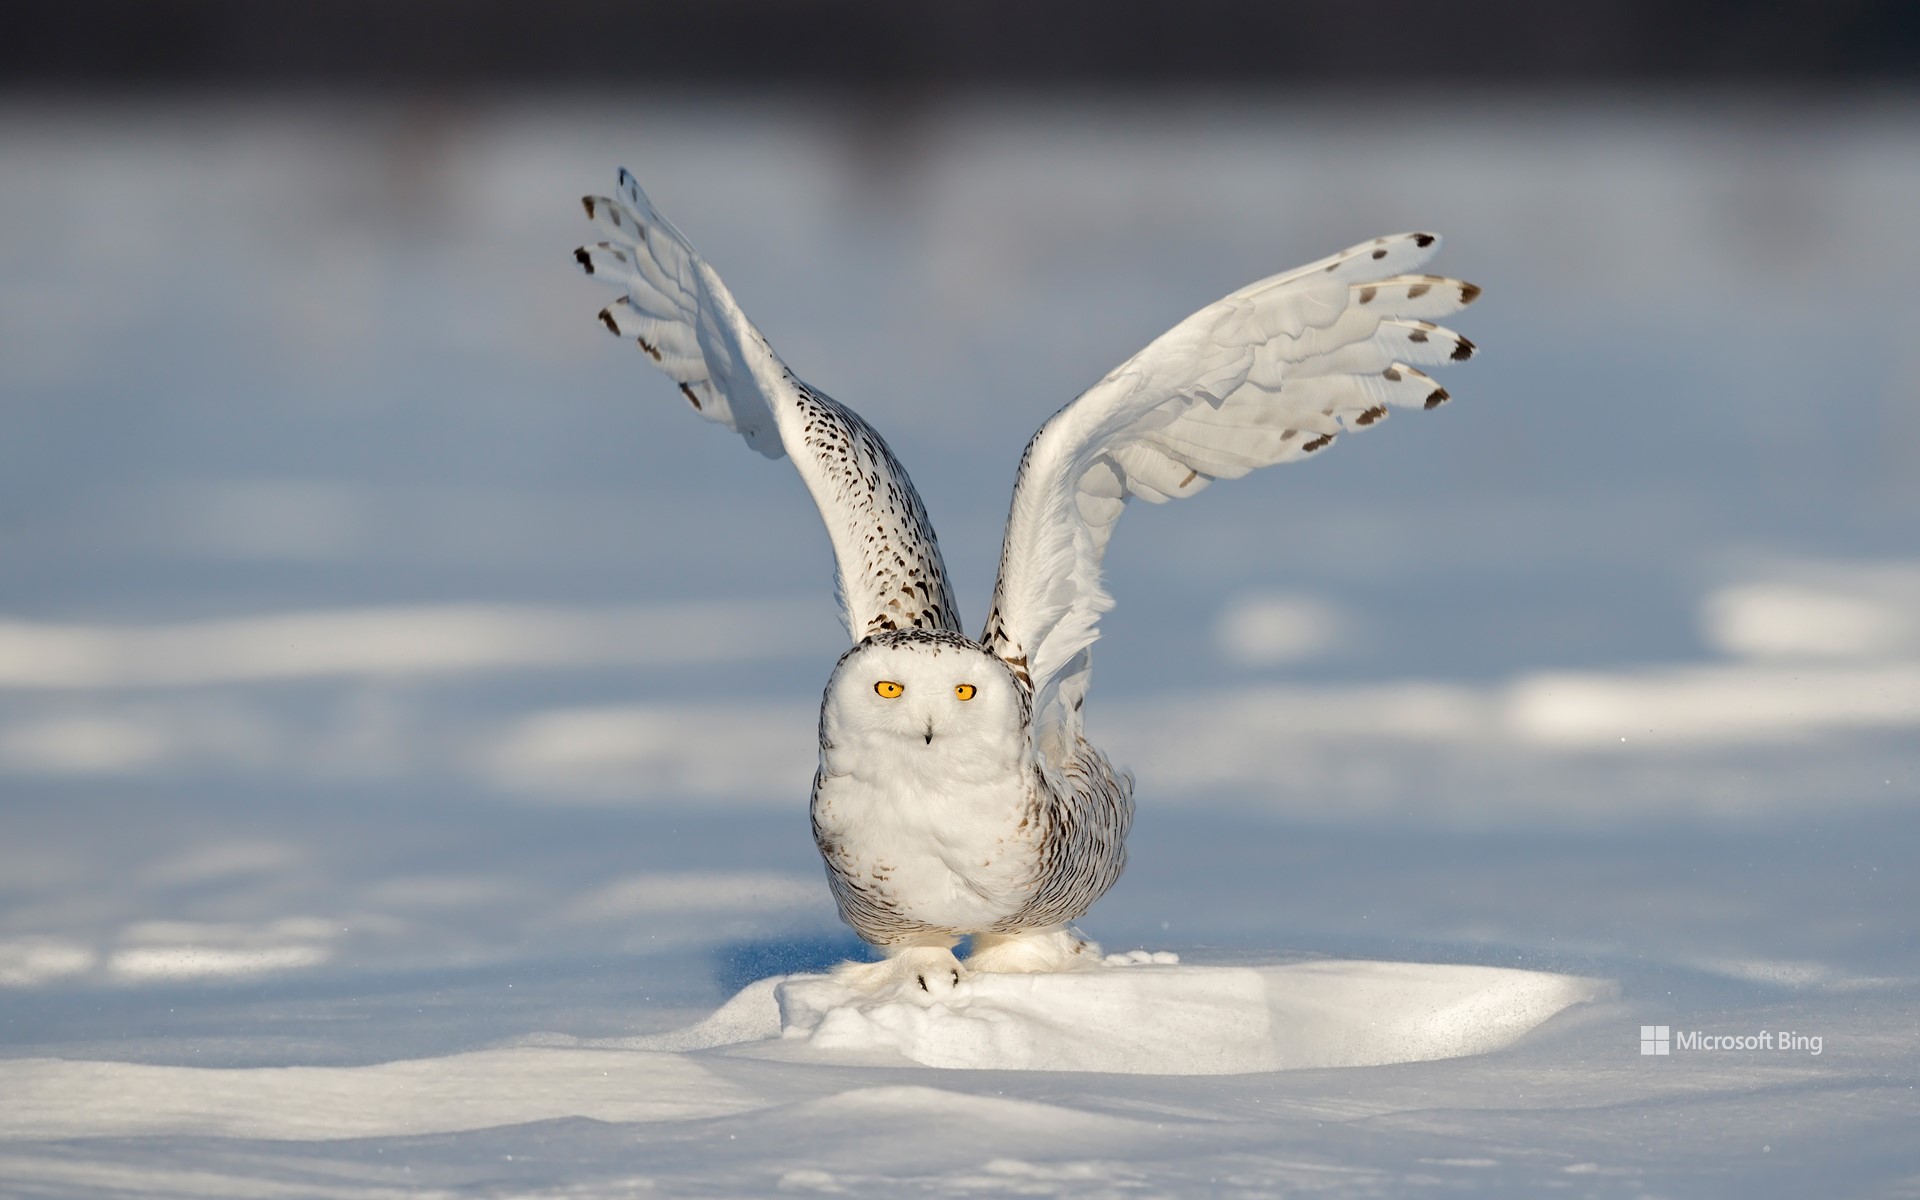 A snowy owl on the icy field, Quebec City, Canada